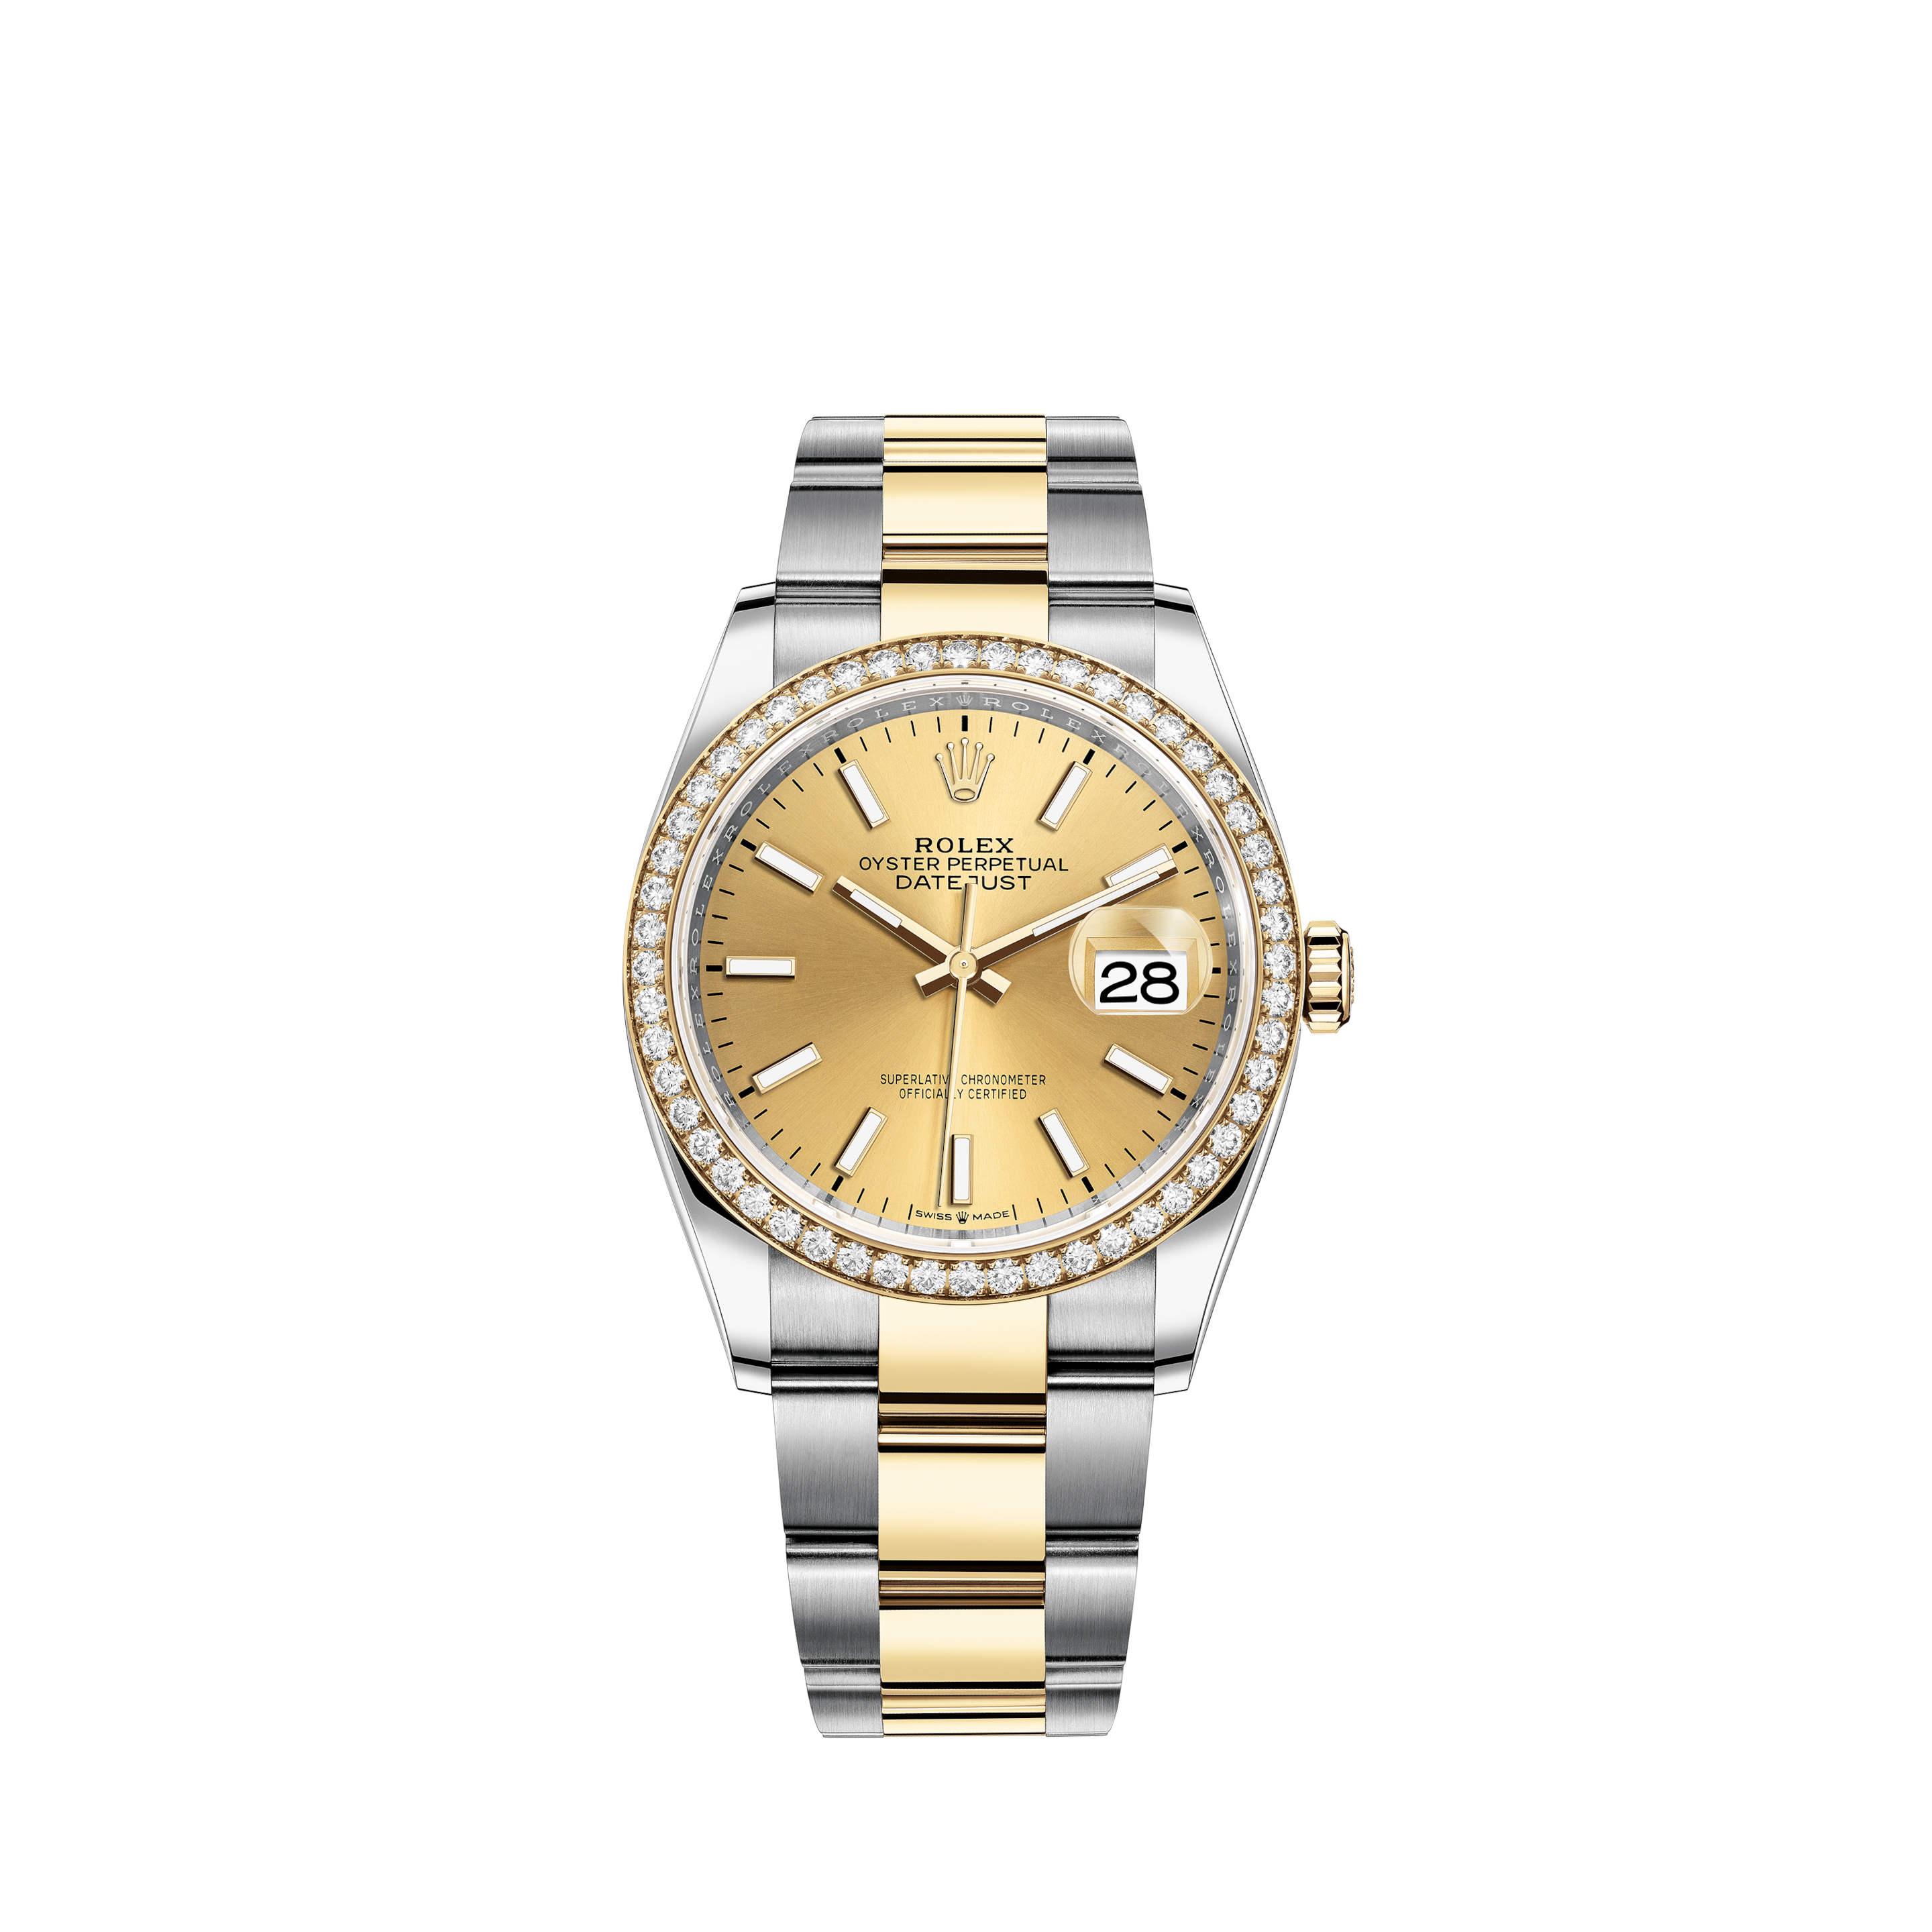 Rolex Datejust 69174 26mm in Steel & Gold with Rolex box and papers.